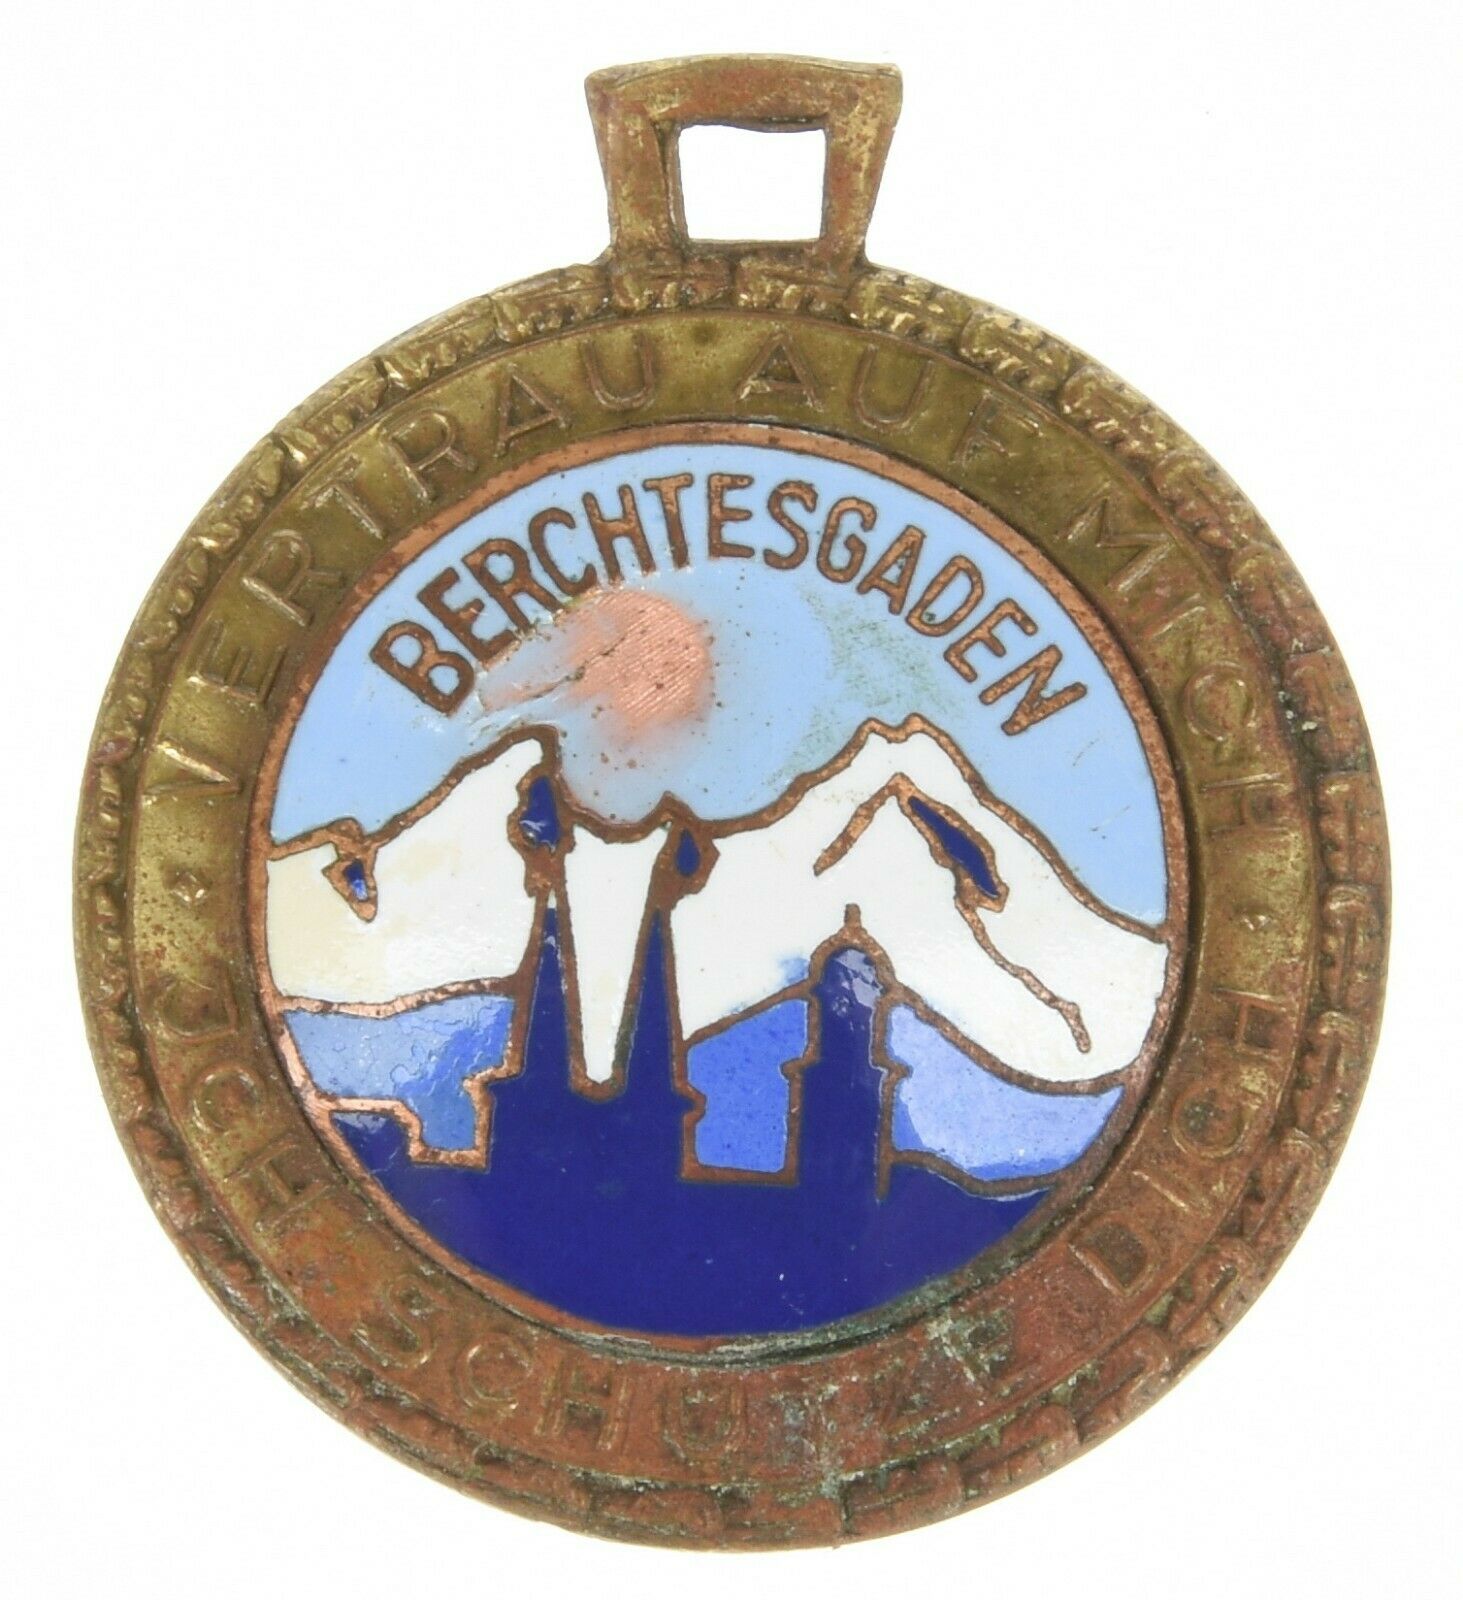 Norse God Ullr "trust Me To Protect You" Medallion, Berchtesgaden, Germany